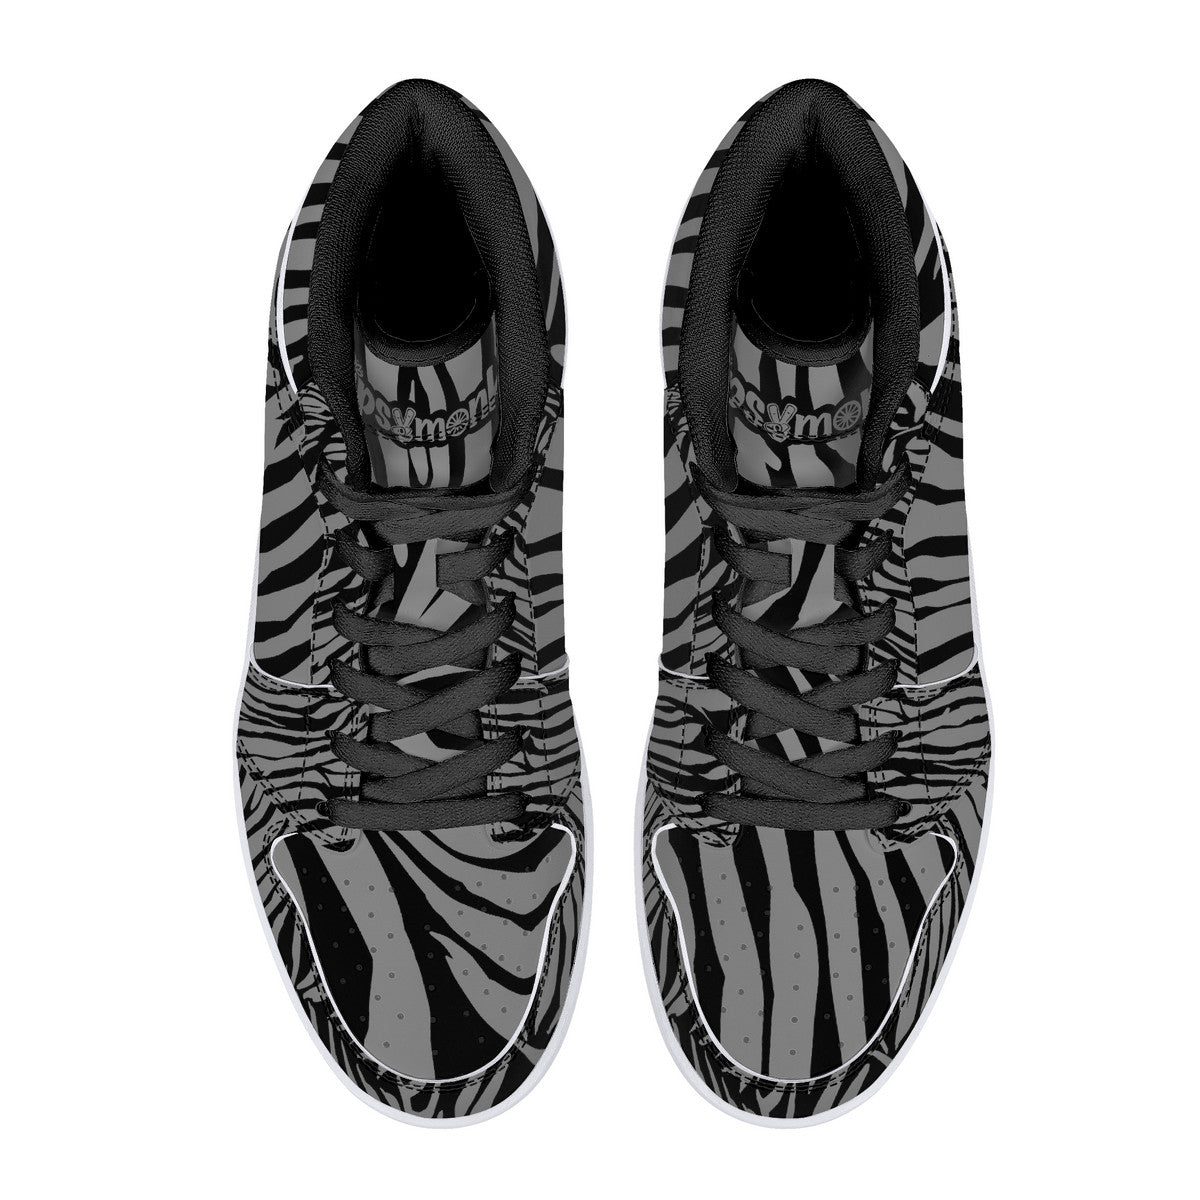 "Mono Zebra" High-Top Synthetic Leather Sneakers